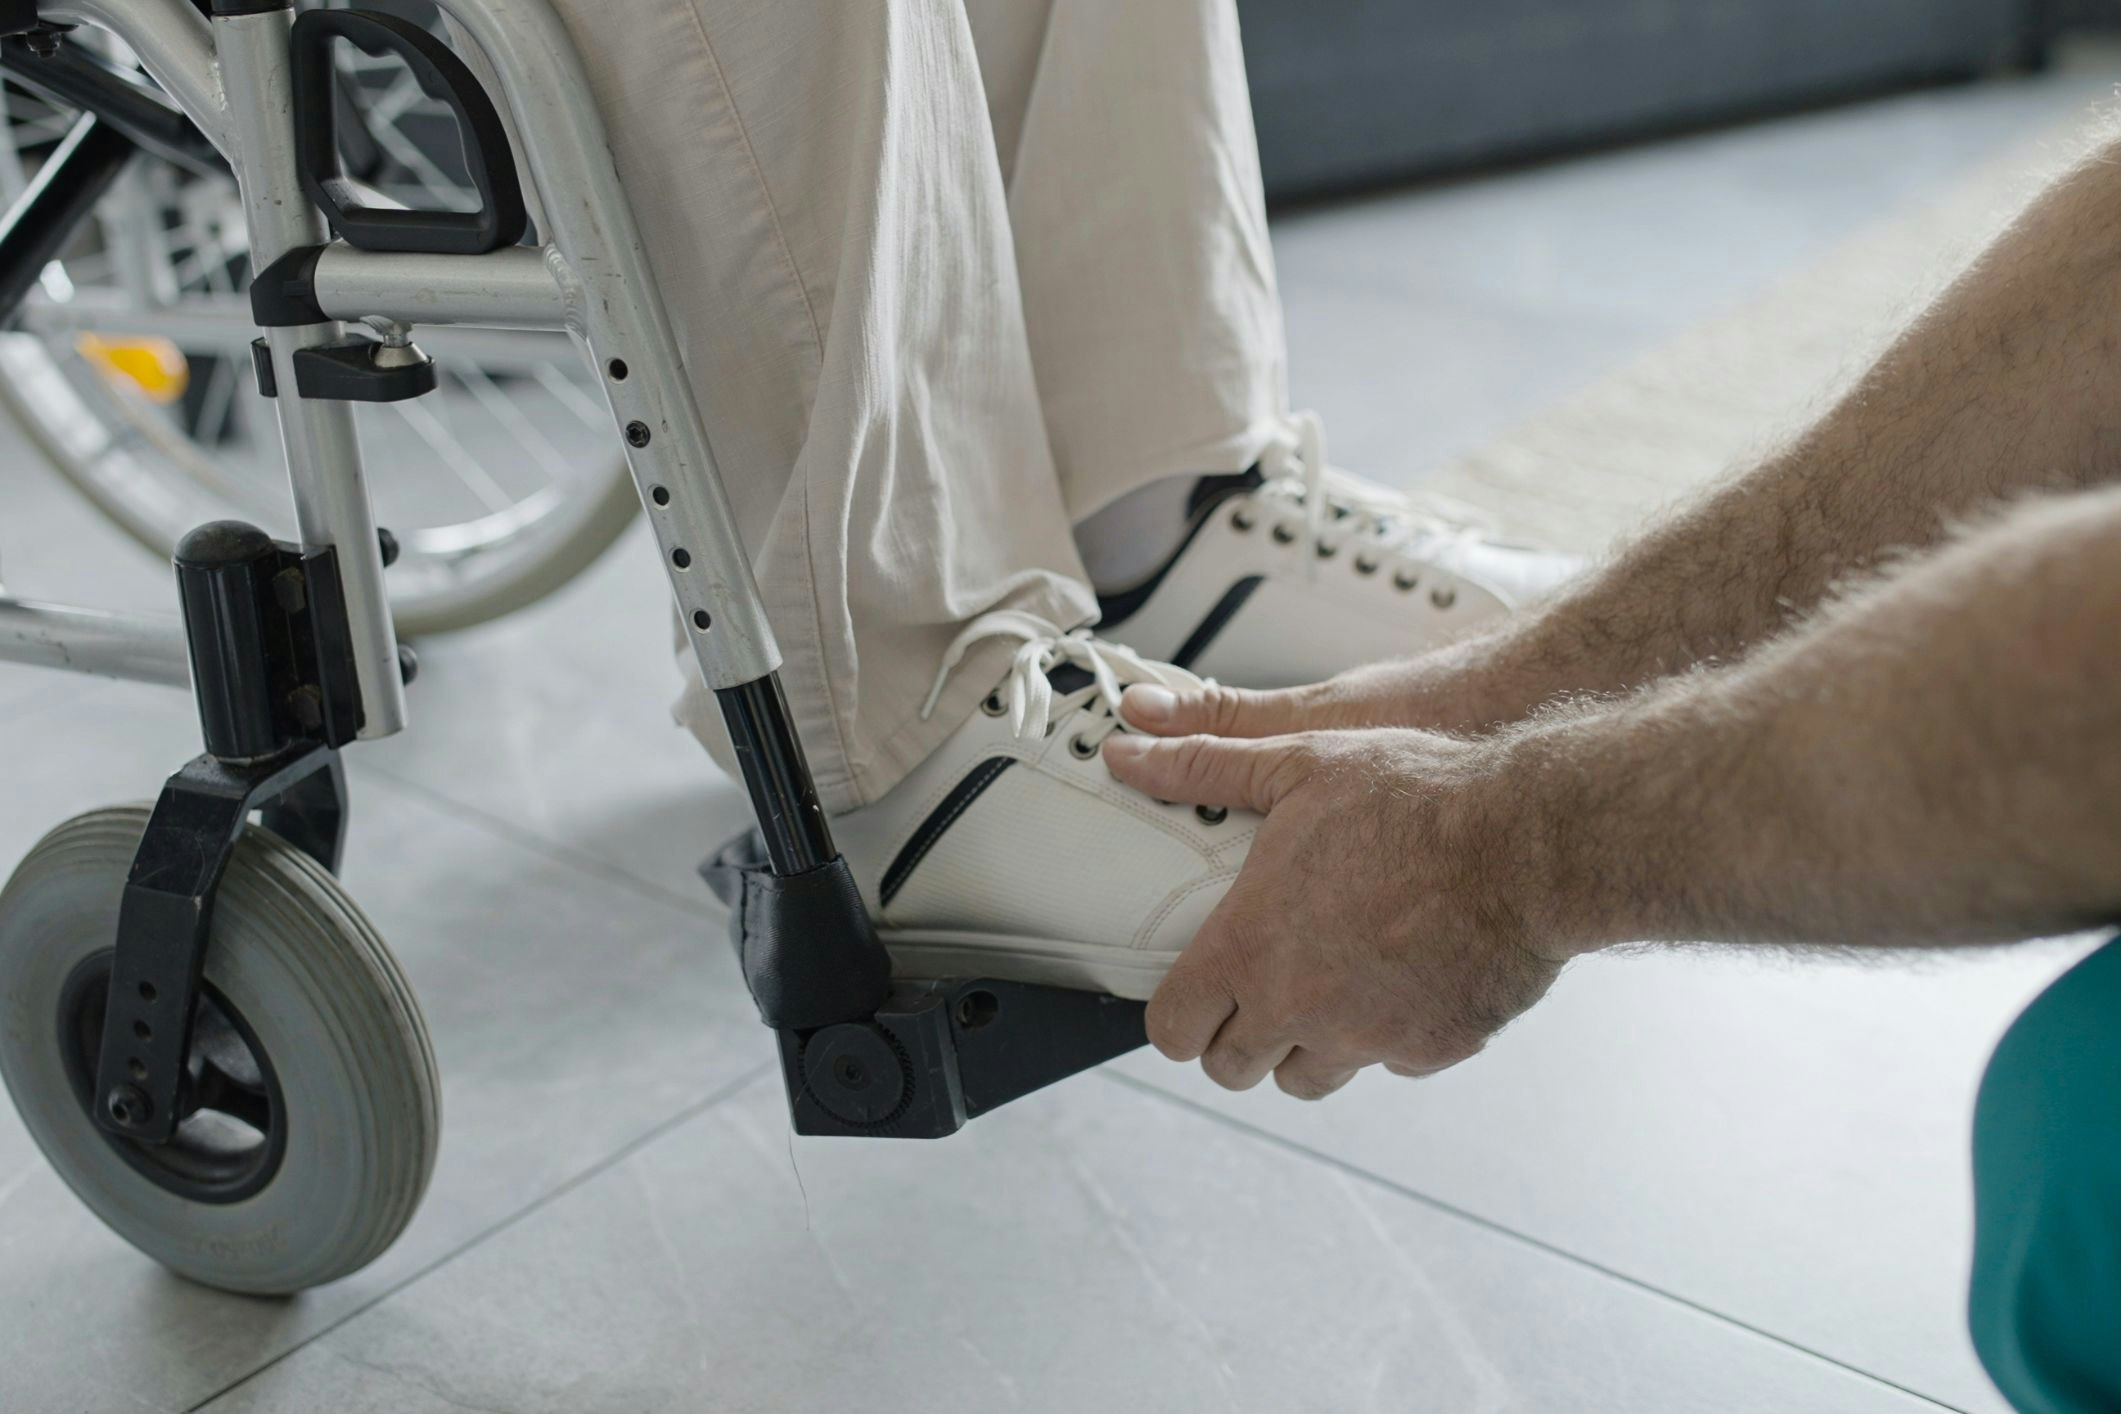 <p>The Royal Commission into Violence, Abuse, Neglect and Exploitation of People With Disability’s Research Report outlined a plan for eliminating restrictive practices. [Source: Shutterstock]</p>
